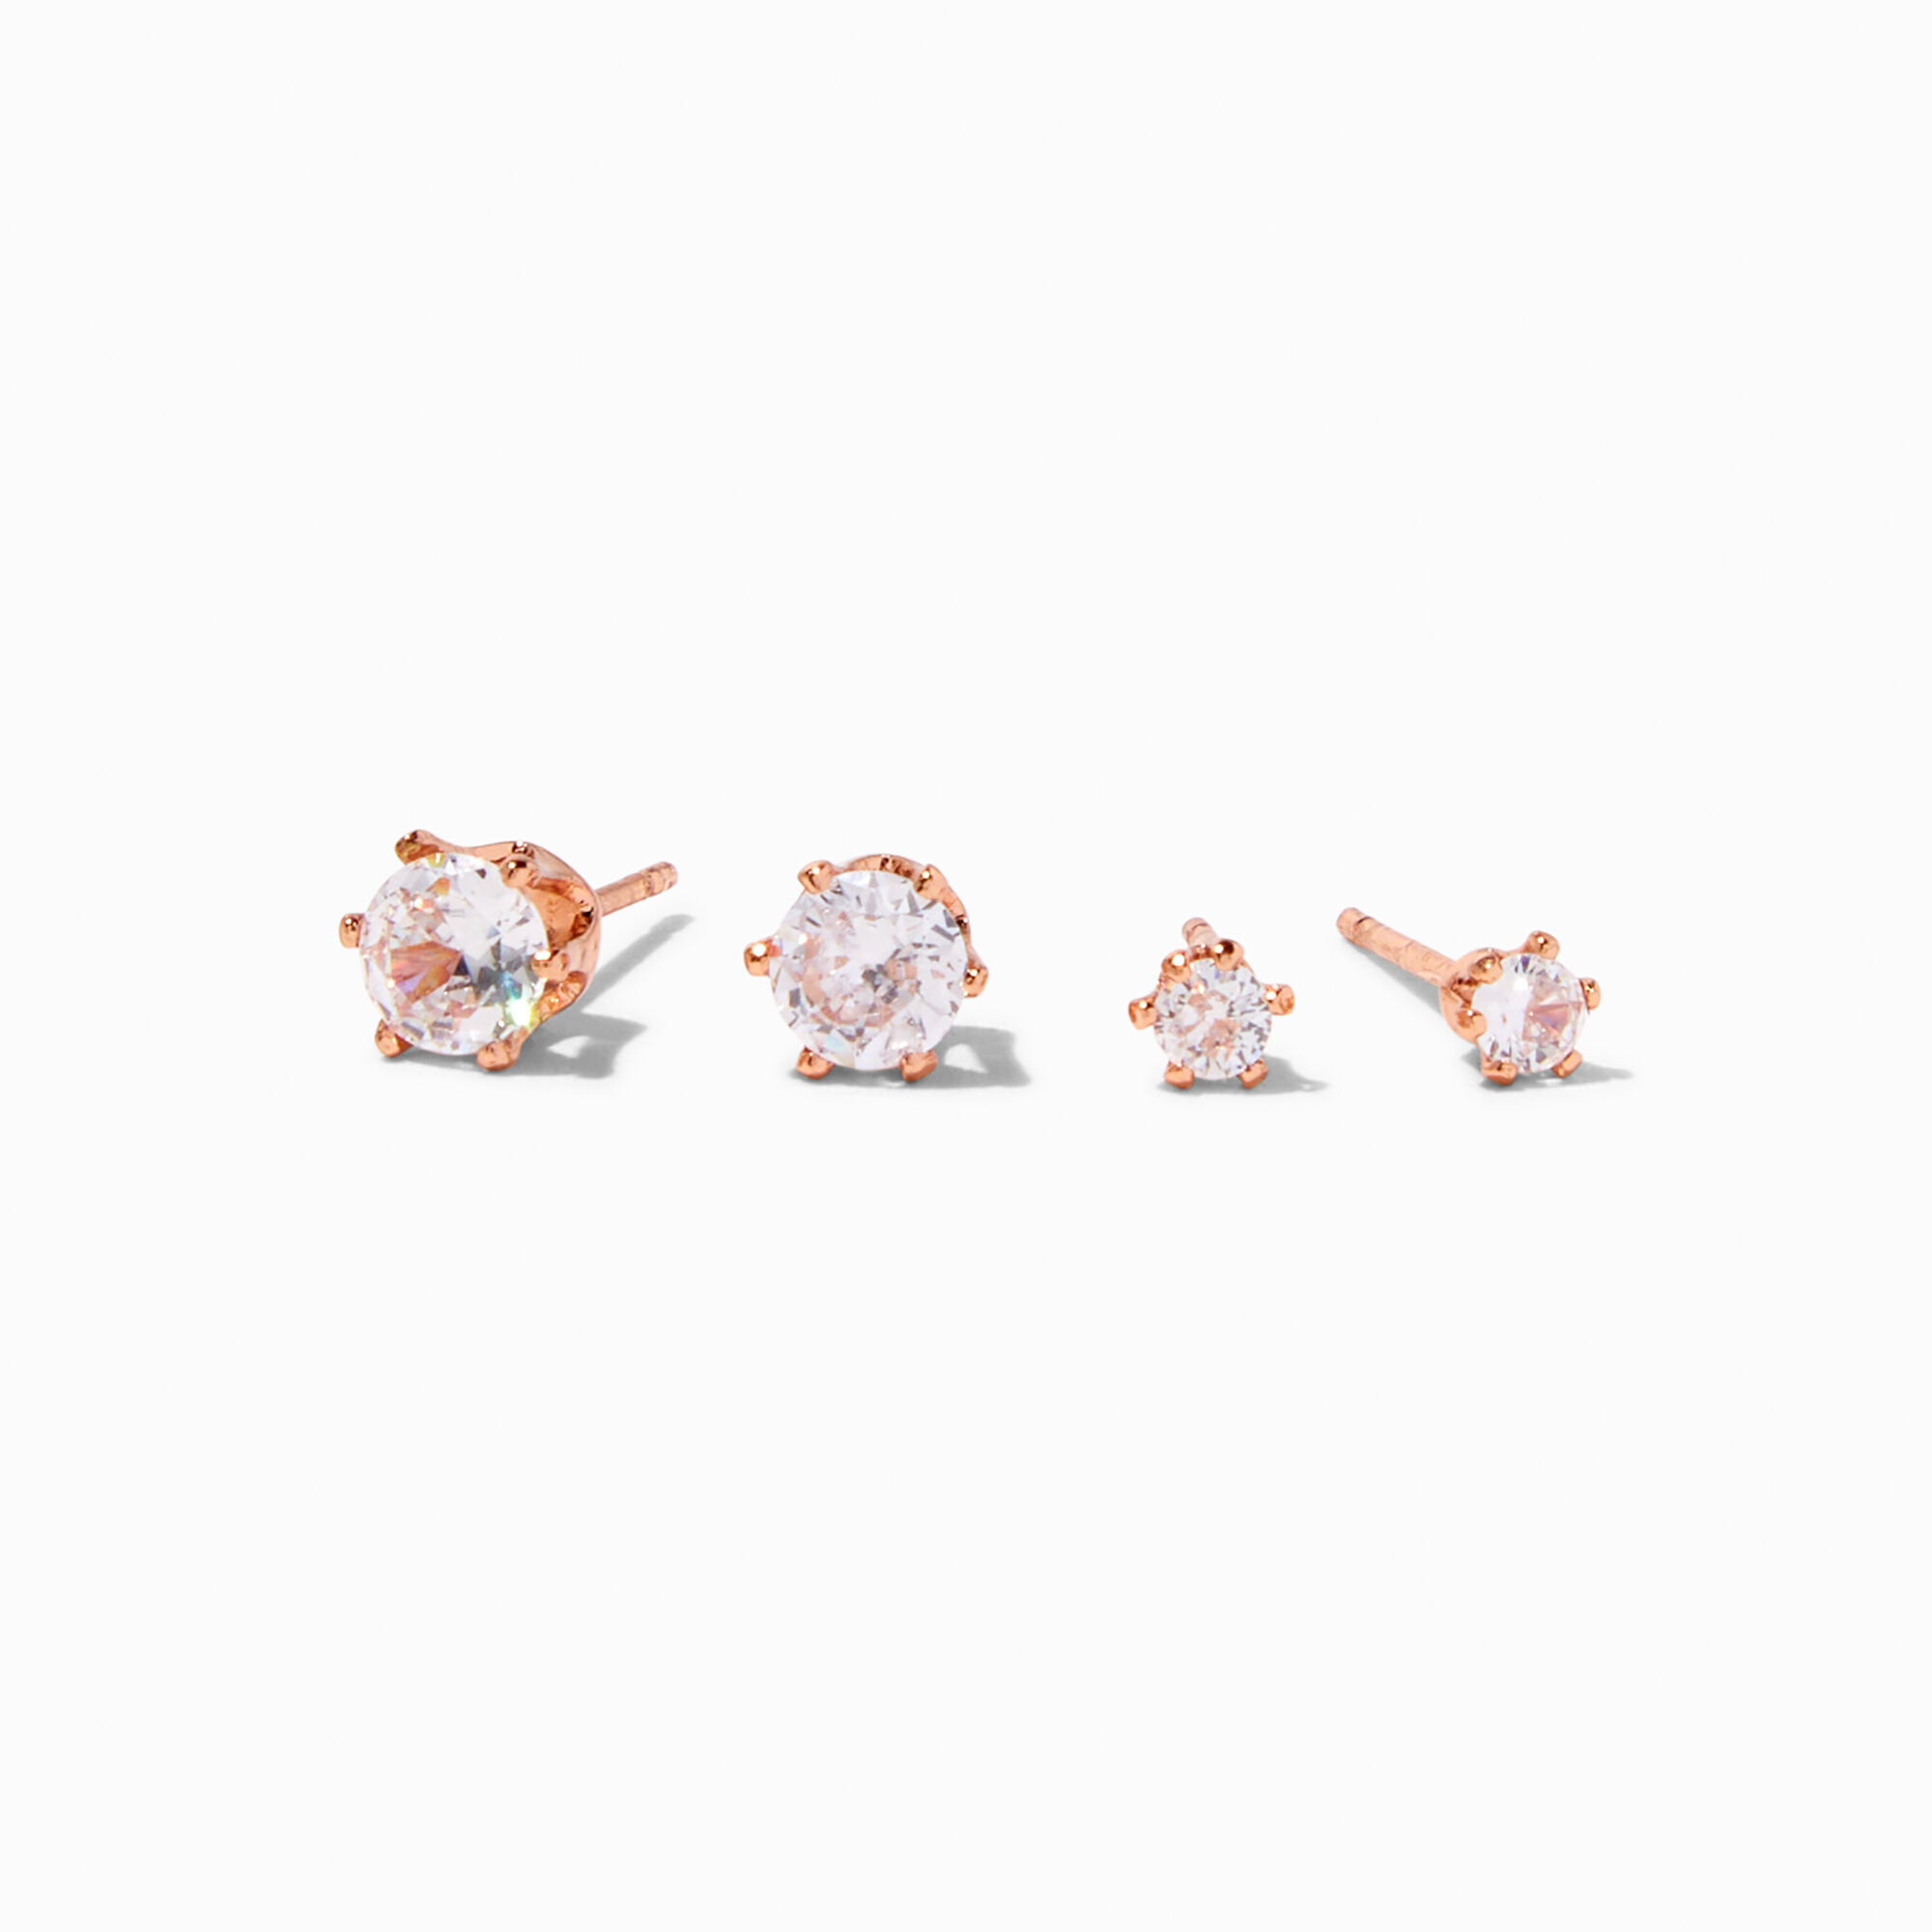 View Claires 18K Plated Rose Cubic Zirconia 3MM 5MM Stud Earrings 2 Pack Gold information